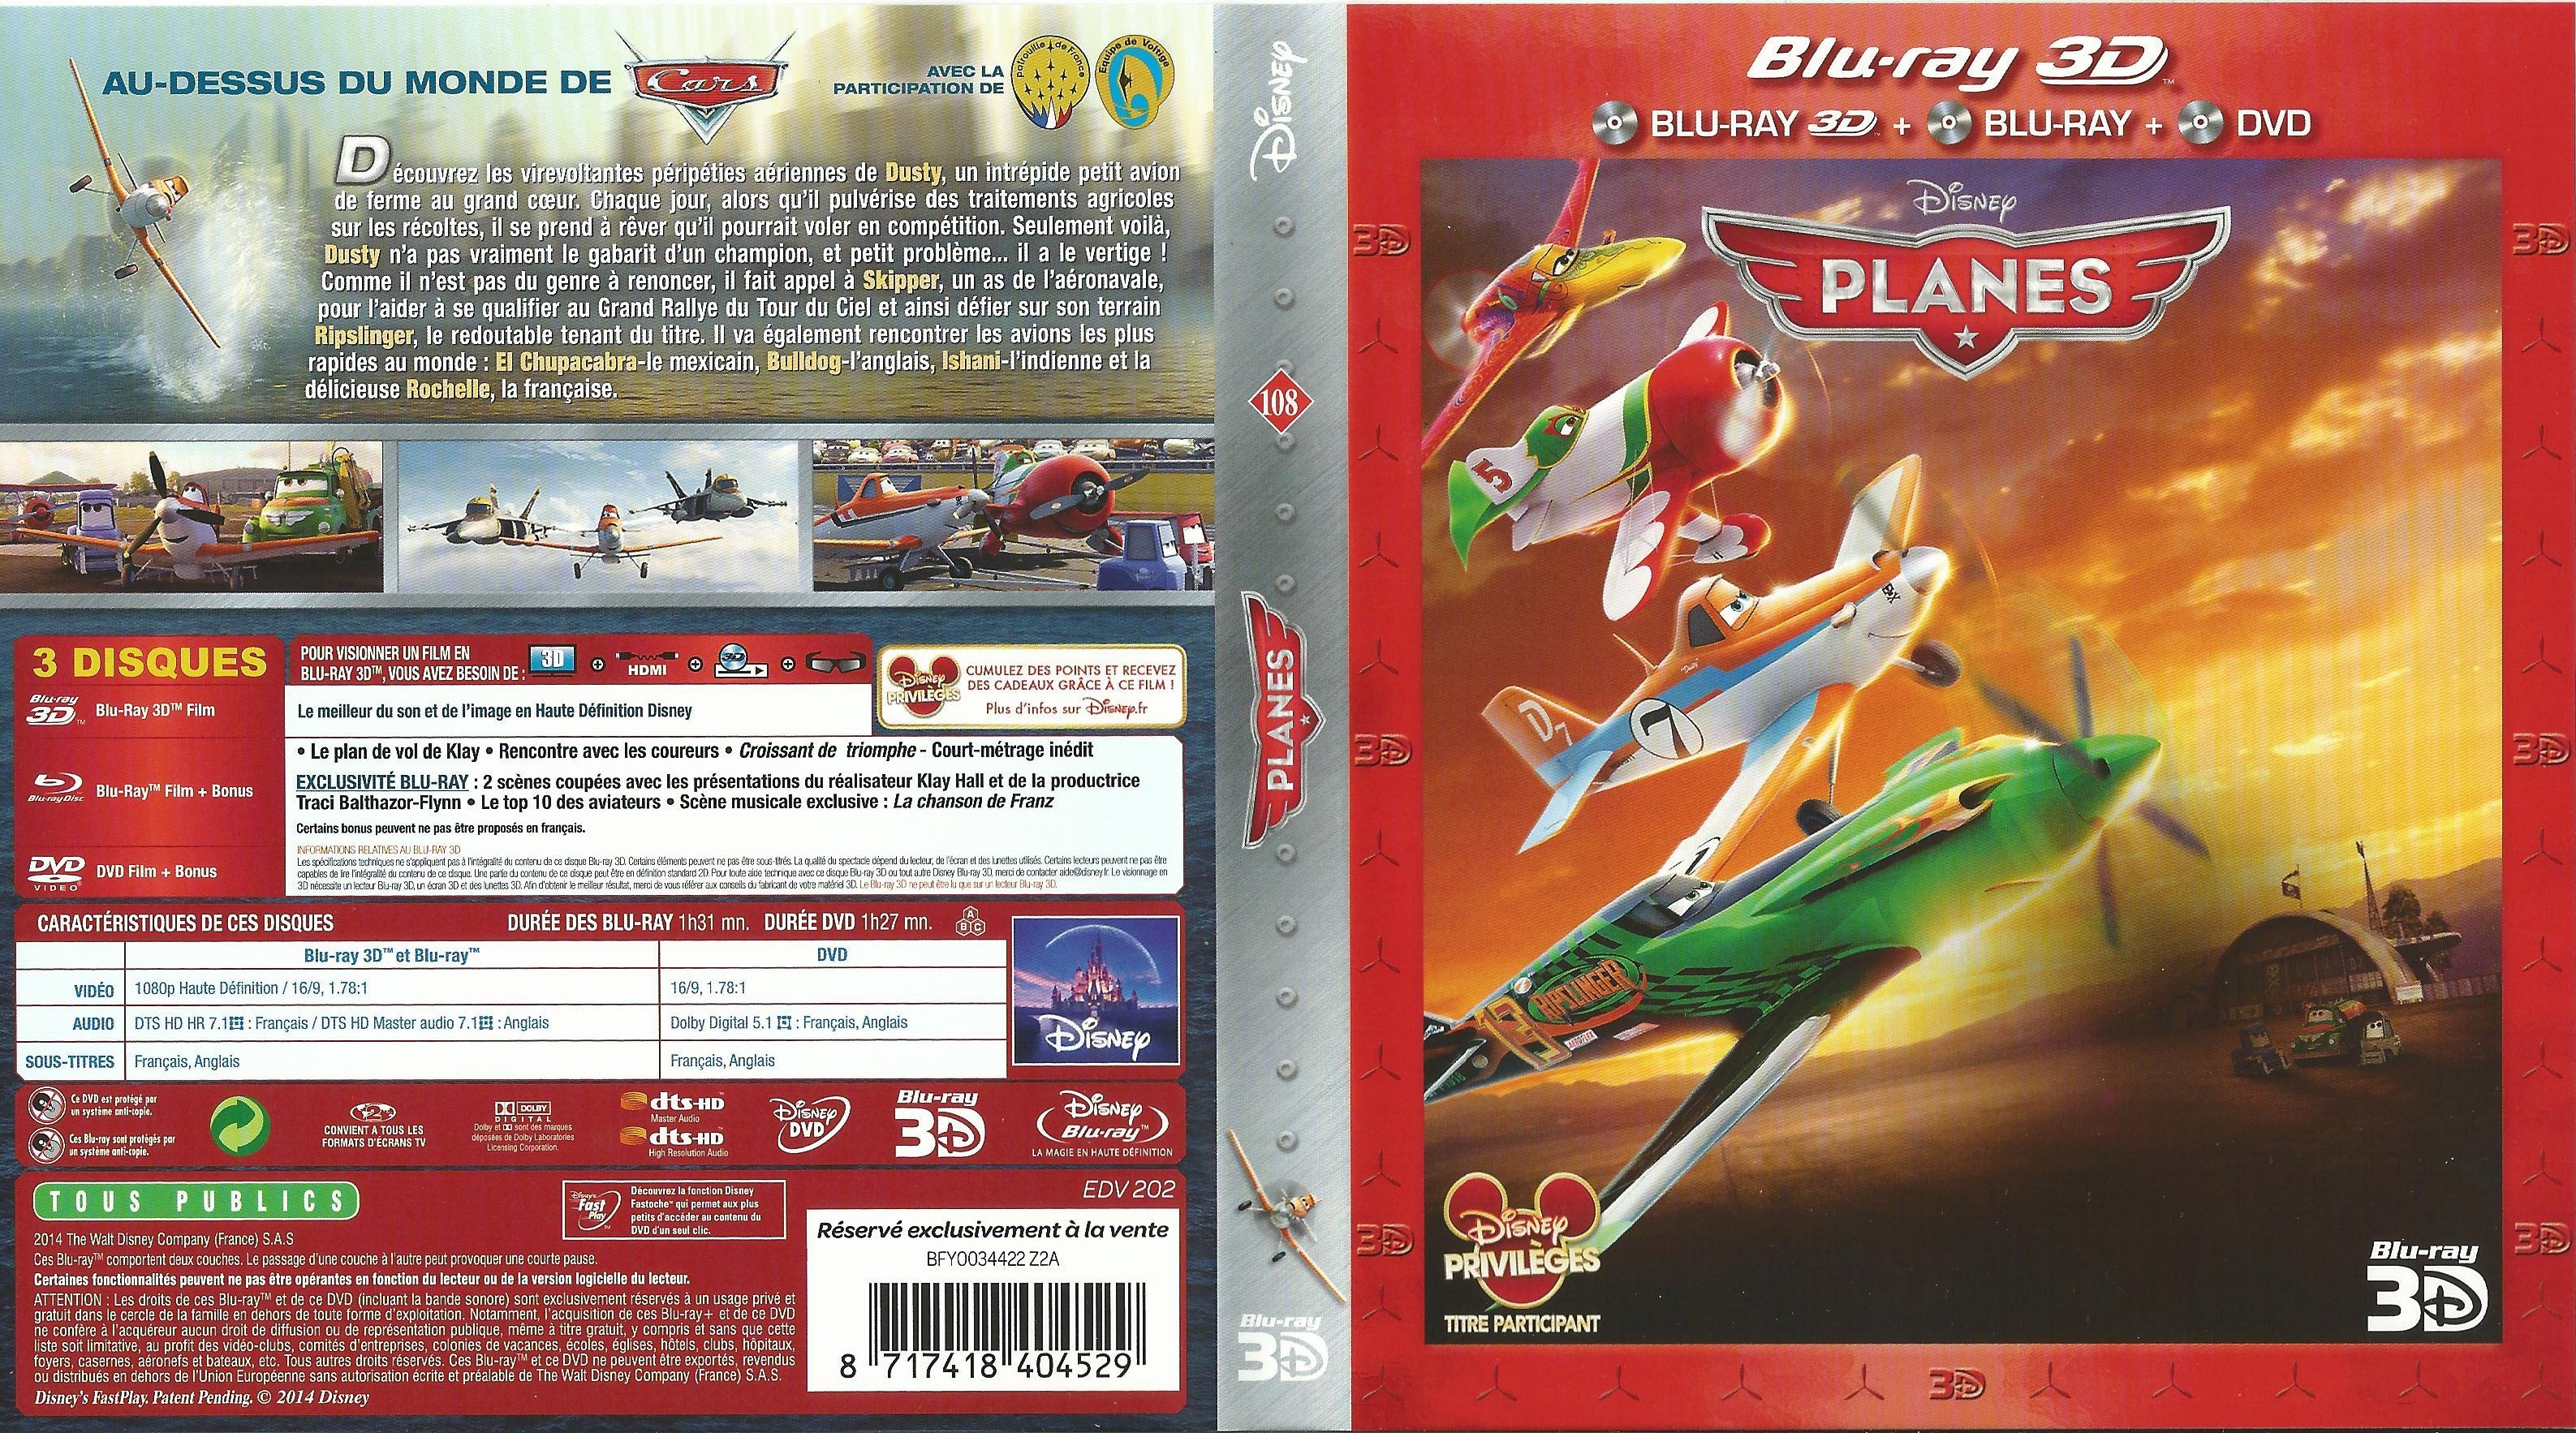 Jaquette DVD Planes 3D (BLU-RAY)